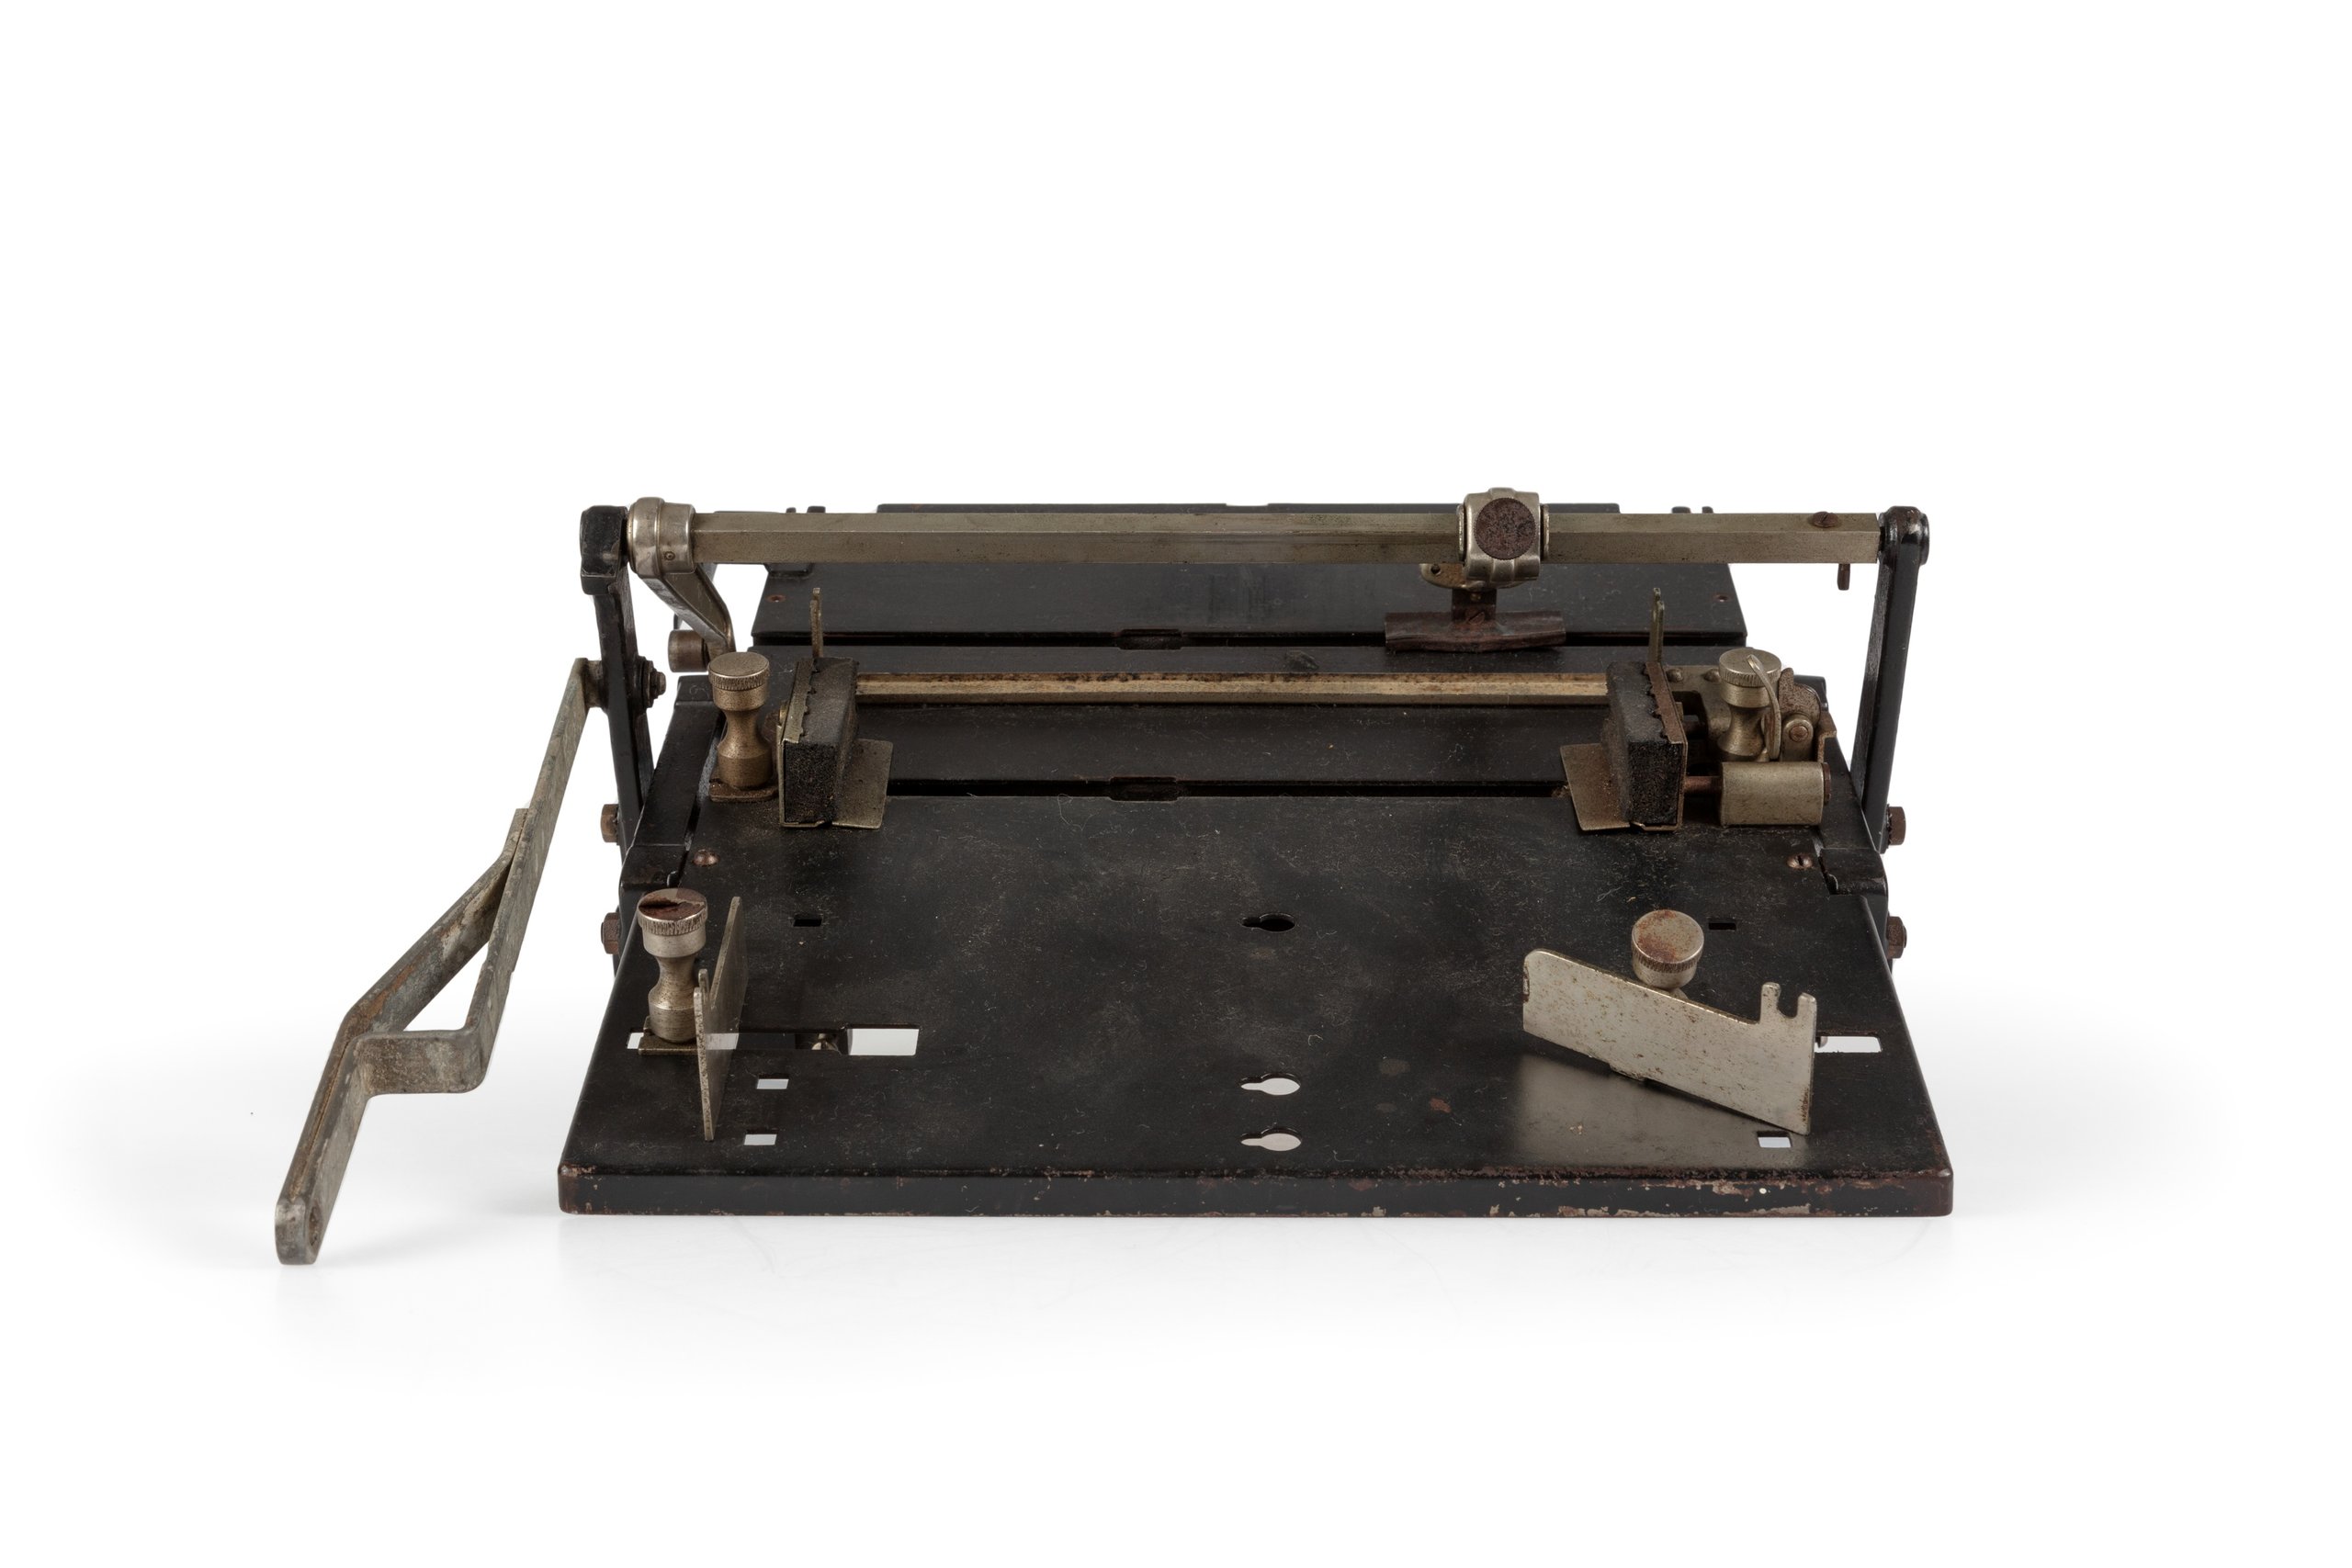 Mimeograph with paper trays made by A B Dick Company